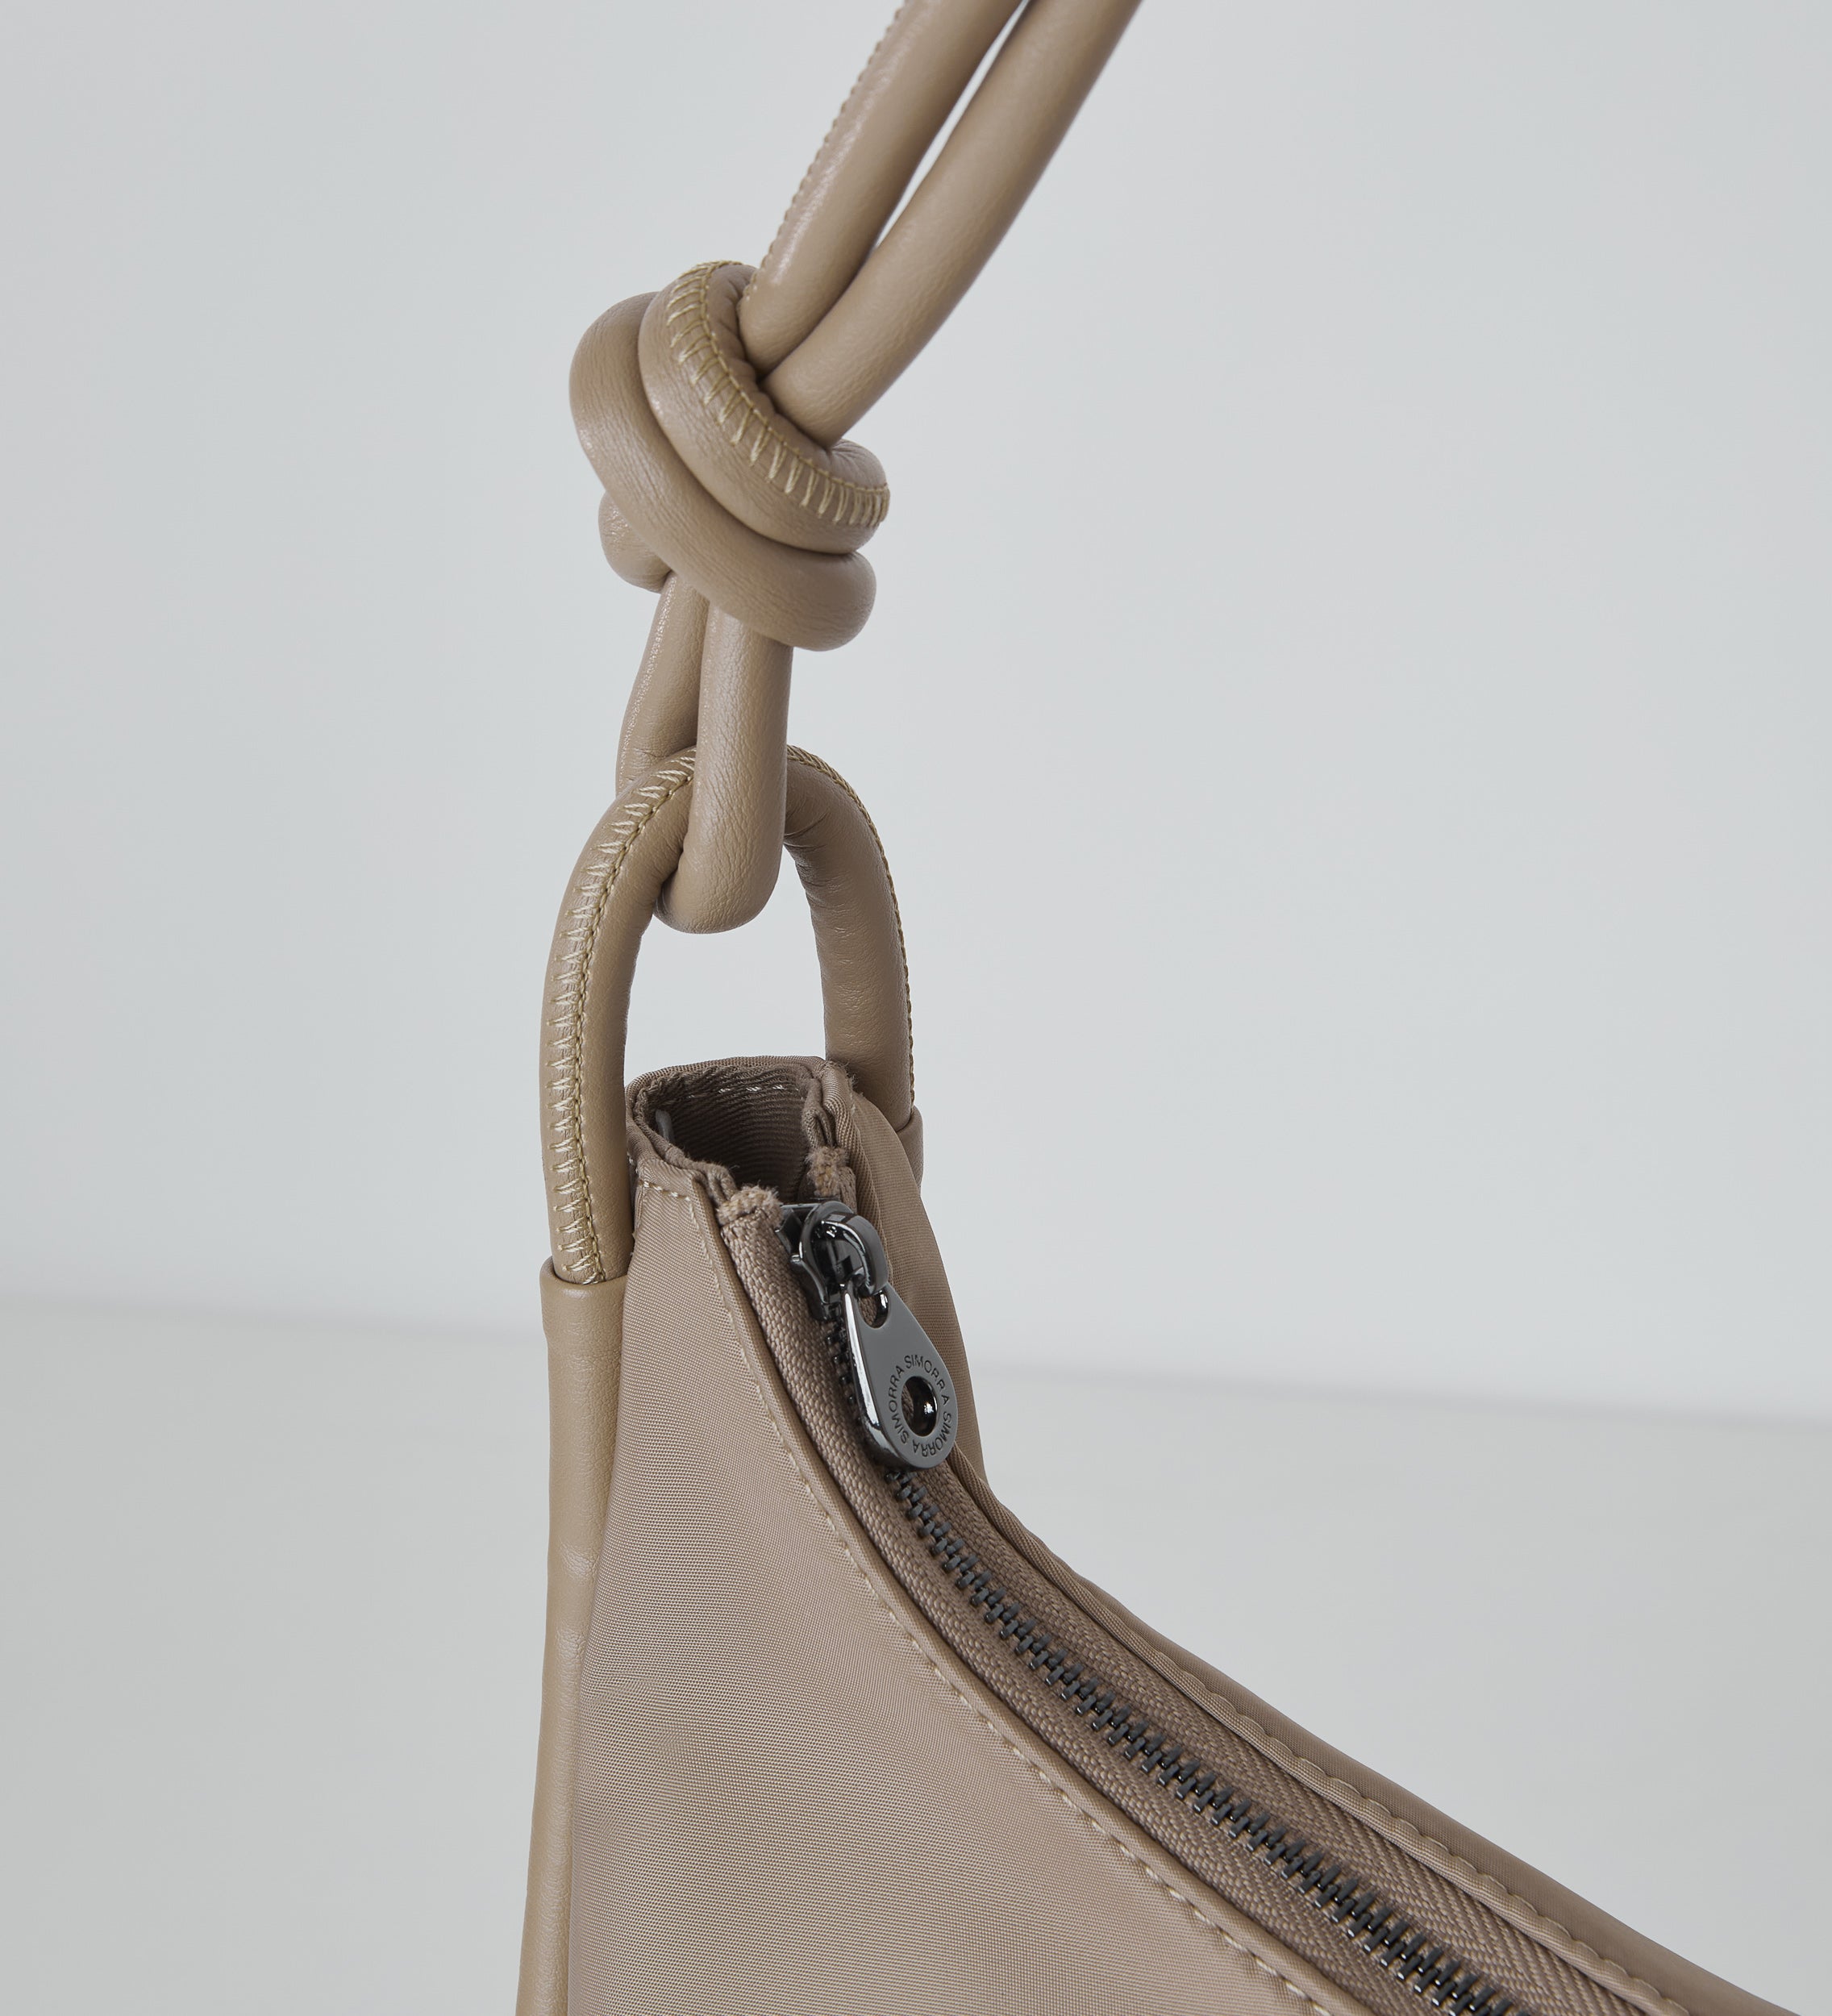 Technical and leather bag